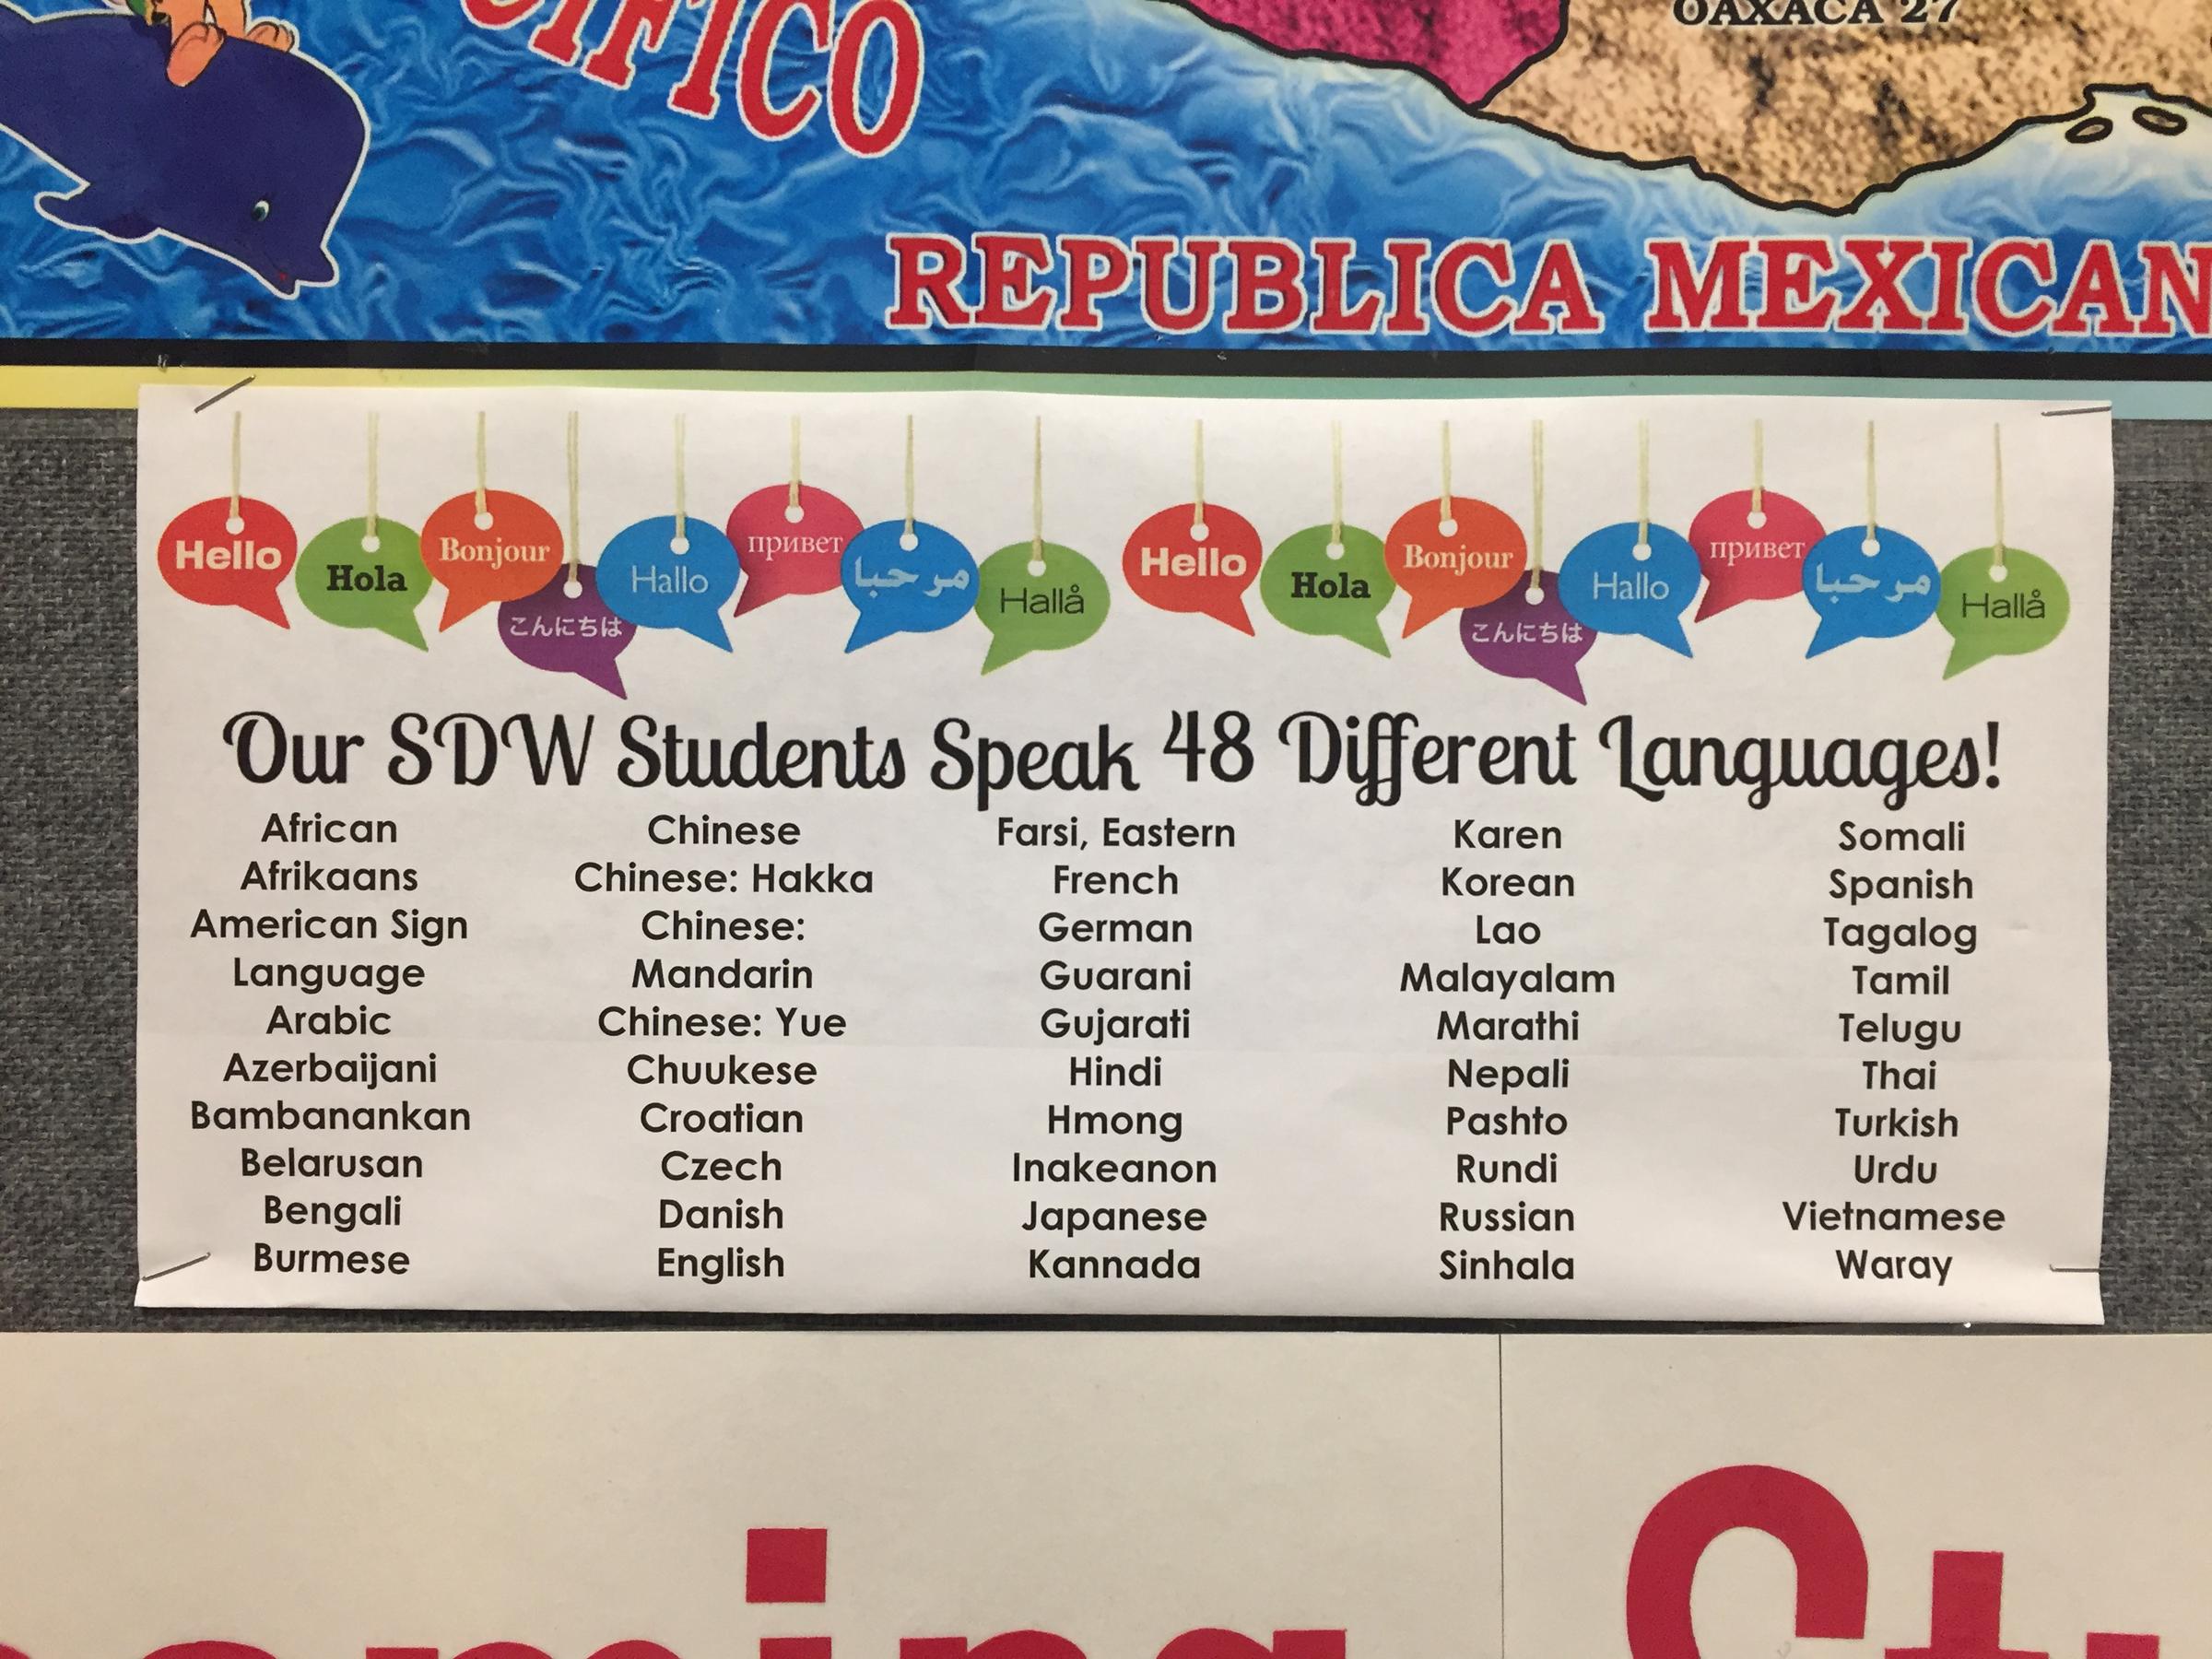 Waukesha Schools Offer #39 Seal of Biliteracy #39 For Multicultural Learning